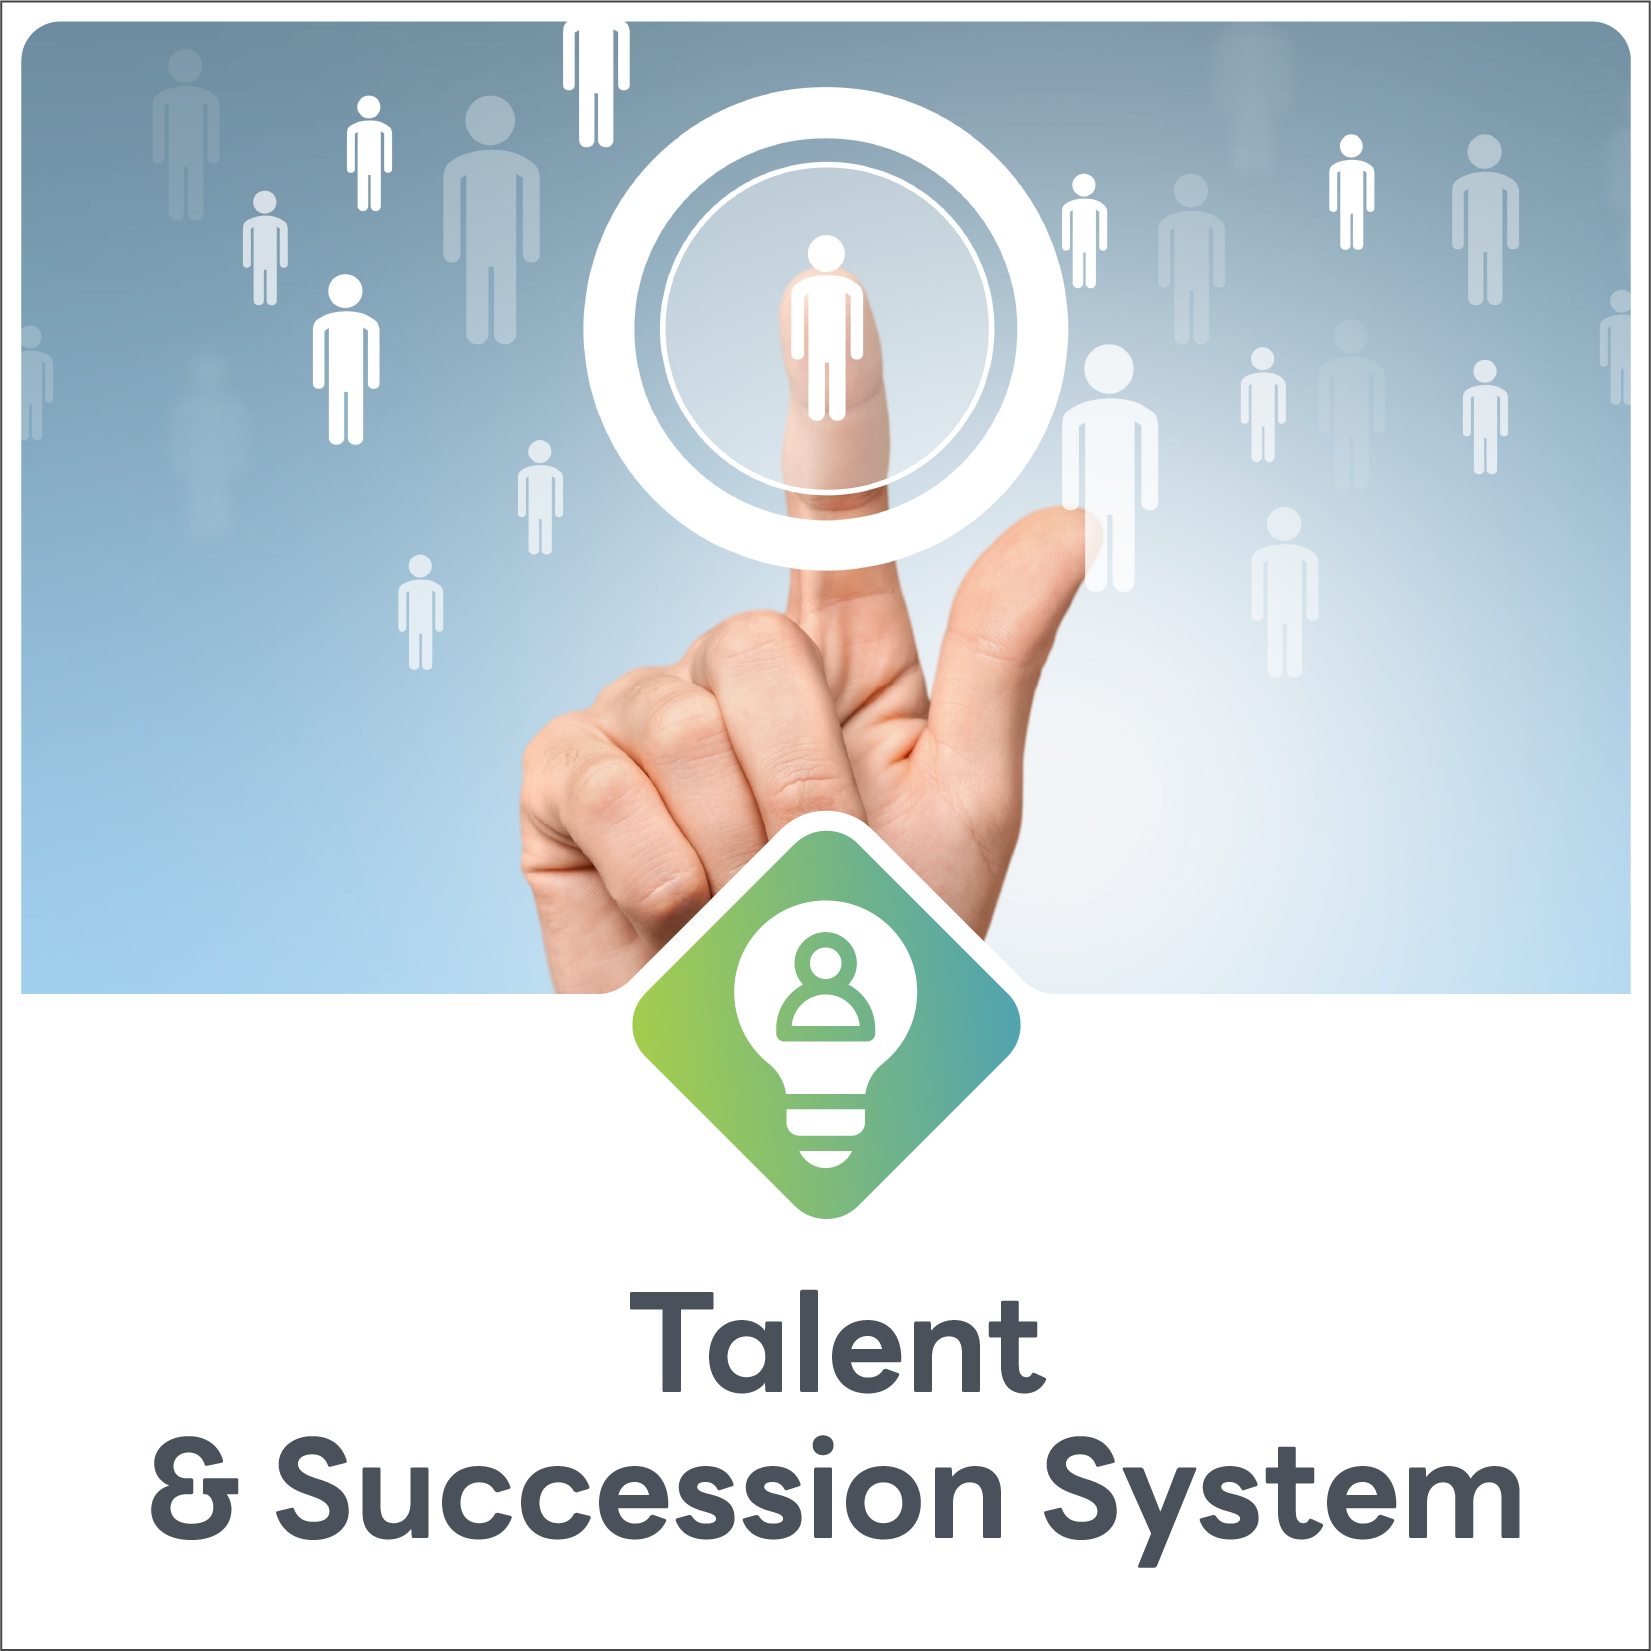 Talent & Succession System